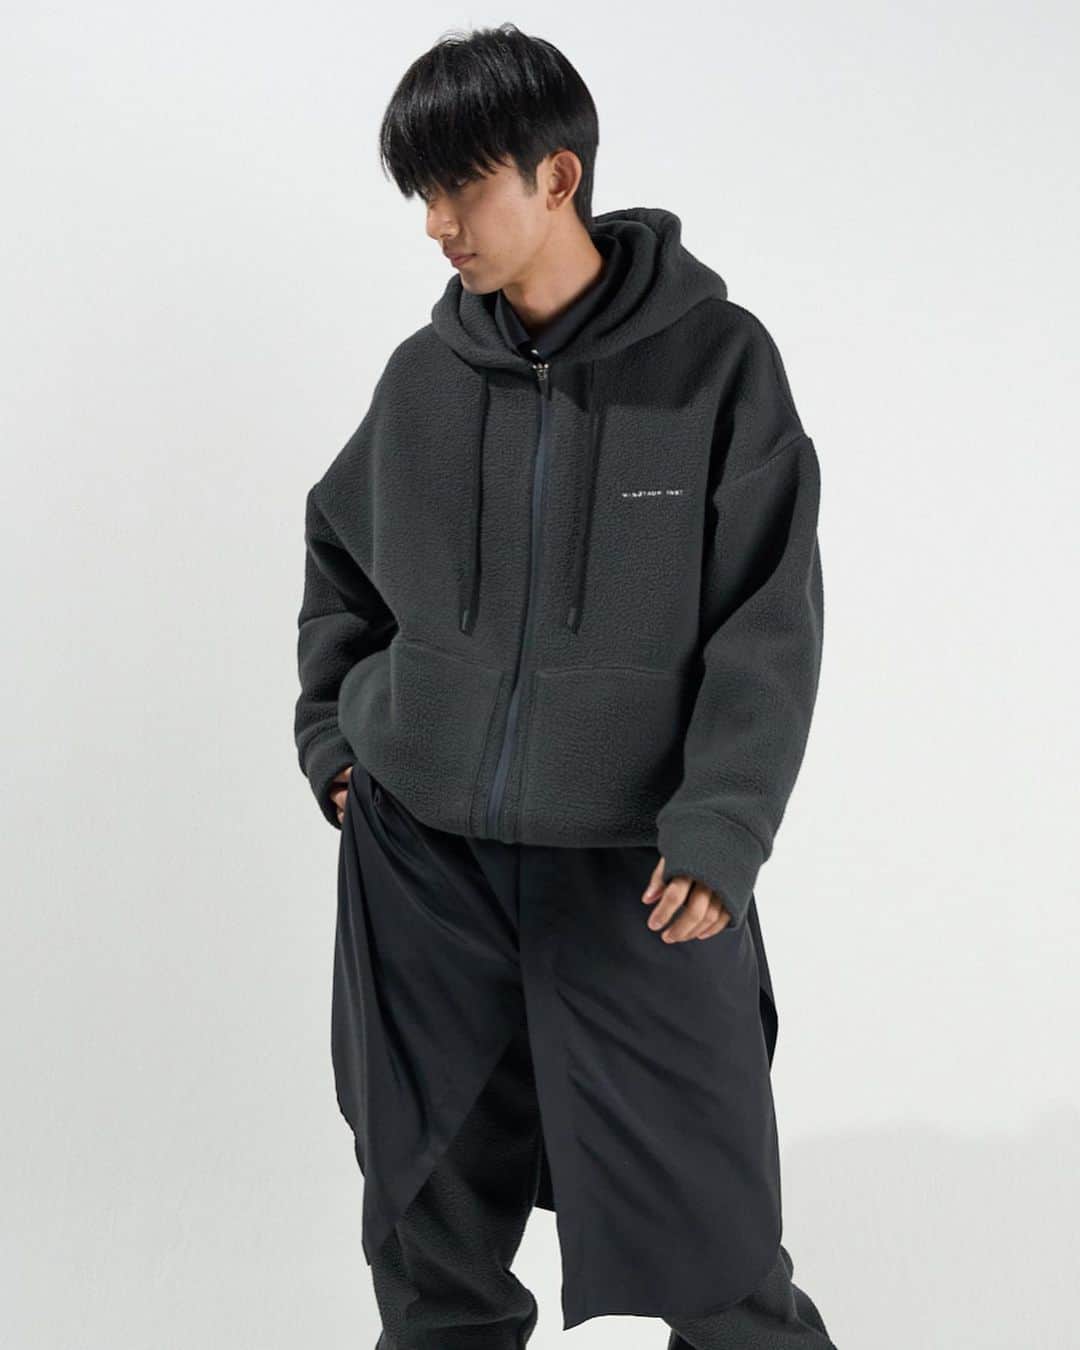 ミノトールのインスタグラム：「BOA ZIP HOOD  FUNCTION : DURABILITY FEVER HEAT INSULATION LIGHT WEIGHT STRETCH   Made in Japan  現代生活で快適な素材、パーツ、ディティールによってアップデートしたフルジップフード。 テクニカルなボアフリース素材は、従来品に比べ驚くほどの軽量感で快適さと暖かさを兼ね備えた生地。 摩擦に強く毛玉になりにくいタフさが加わり、外出時は勿論室内着としての長時間の着用にも対応。 袖口のリブ部分はフィンガーレスグローブとしても使用可能。 同素材アイテムとのセットアップ可能。  A full zip hood updated with materials, parts, and details that are comfortable for modern life. The technical boa fleece material is surprisingly lightweight compared to conventional products, and is both comfortable and warm. It has added toughness that is resistant to friction and does not pill, making it suitable for long-term wear as indoor wear as well as when going out. The ribbed cuffs can also be used as fingerless gloves. Can be set up with items of the same material.  BOA 2W PANTS  FUNCTION : DURABILITY FEVER HEAT INSULATION LIGHT WEIGHT STRETCH   Made in Japan  現代生活で快適な素材、パーツ、ディティールによってアップデートしたボトムス。 テクニカルなボアフリース素材は、従来品に比べ驚くほどの軽量感で快適さと暖かさを兼ね備えた 生地。 摩擦に強く毛玉になりにくいタフさが加わり、外出時は勿論 室内着としての長時間の着用にも対応。 ドローコードでの裾幅の調整により2WAYシルエットに対応。 同素材アイテムとのセットアップ可能。  Bottoms updated with materials, parts, and details that are comfortable for modern life. The technical boa fleece material is surprisingly lightweight compared to conventional products, and is both comfortable and warm. It has added toughness that resists friction and pilling, making it suitable for long-term wear as indoor wear as well as when going out. It supports a 2-way silhouette by adjusting the hem width with a drawcord. Can be set up with items made of the same material.  #minotaur_inst #minotaurinst #minotaur #ミノトールインスト #ミノトール #functional #comfortable #miyashitapark #tech #techwear #テック #relaxsmart #リラックススマート #relaxsmartwear #リラックススマートウェア #boa #inoutwear #madeinjapan #setup」